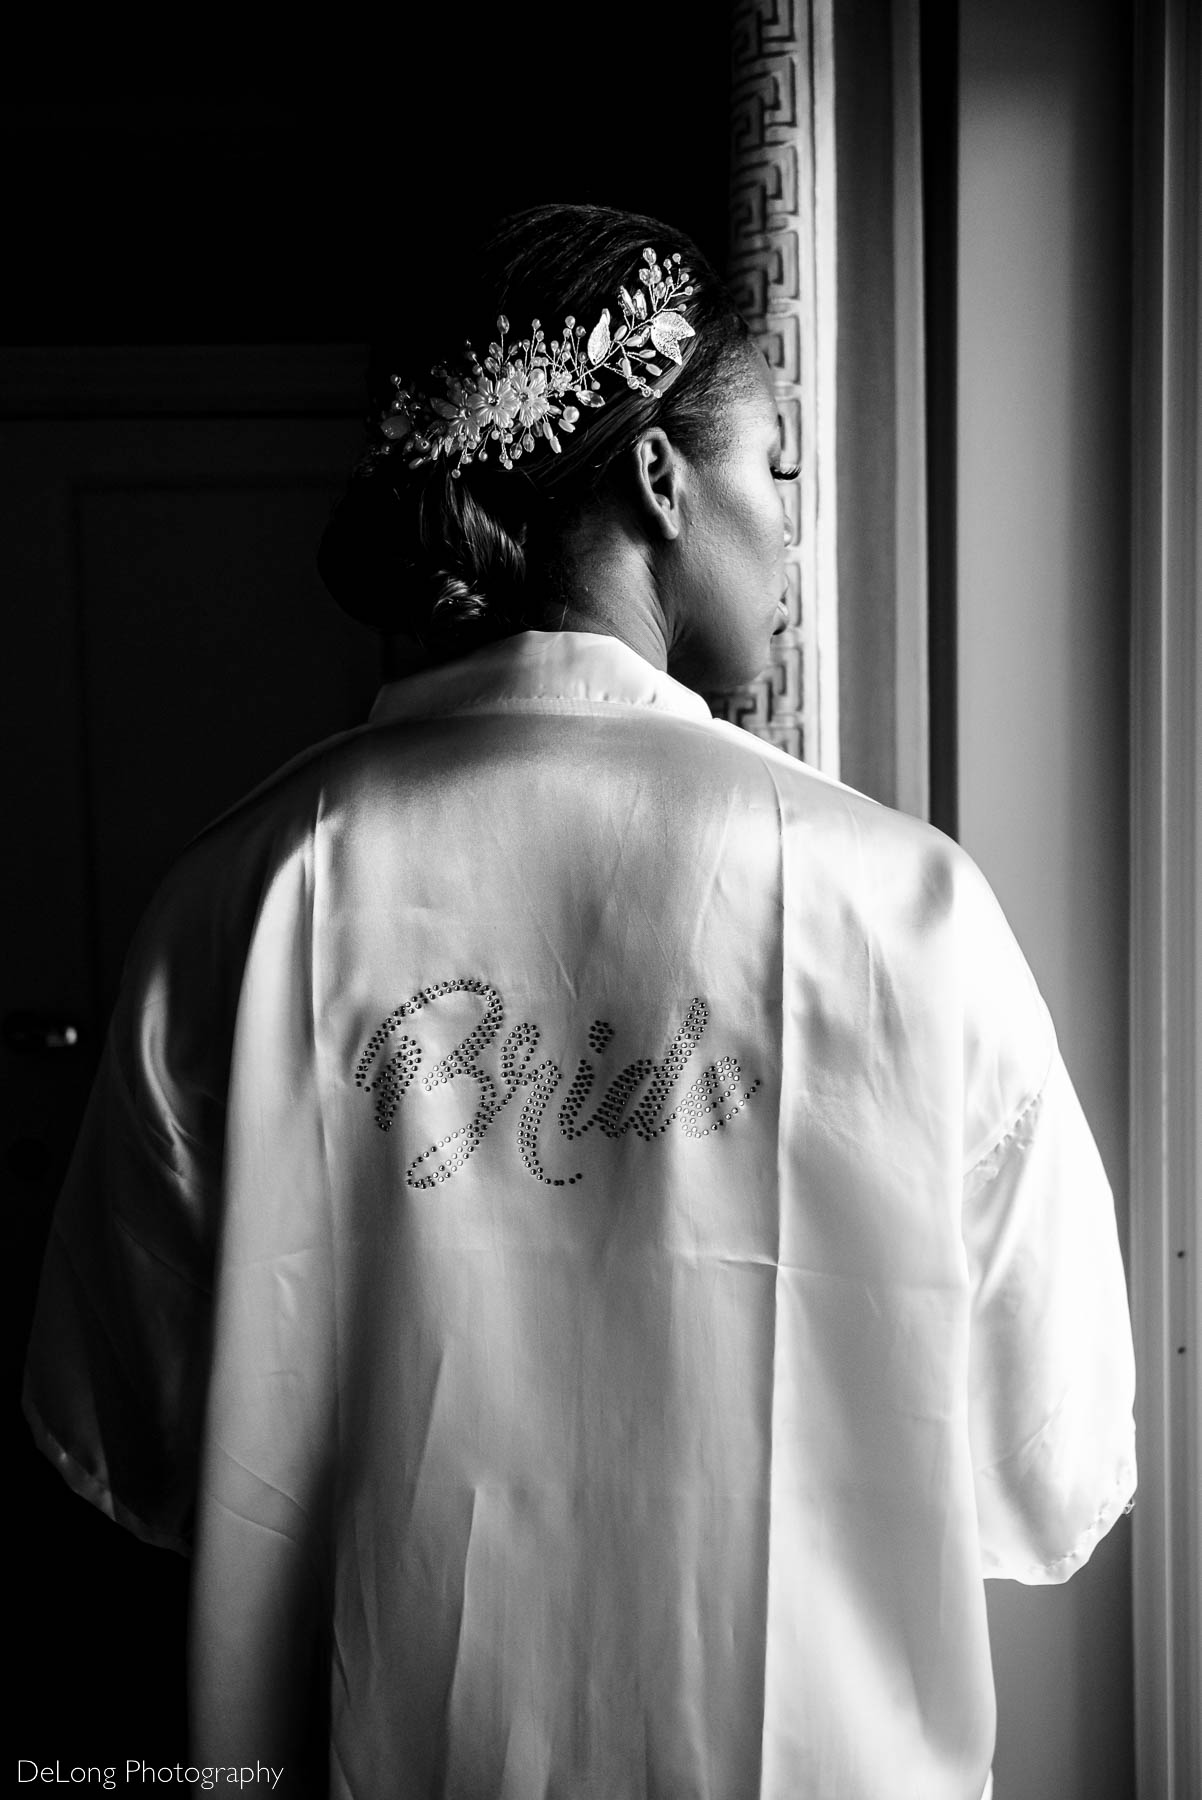 Black and white photograph highlighting the bride's embellished robe and hair piece taken as she was getting ready at the Ballantyne Hotel by Charlotte wedding photographers DeLong Photography